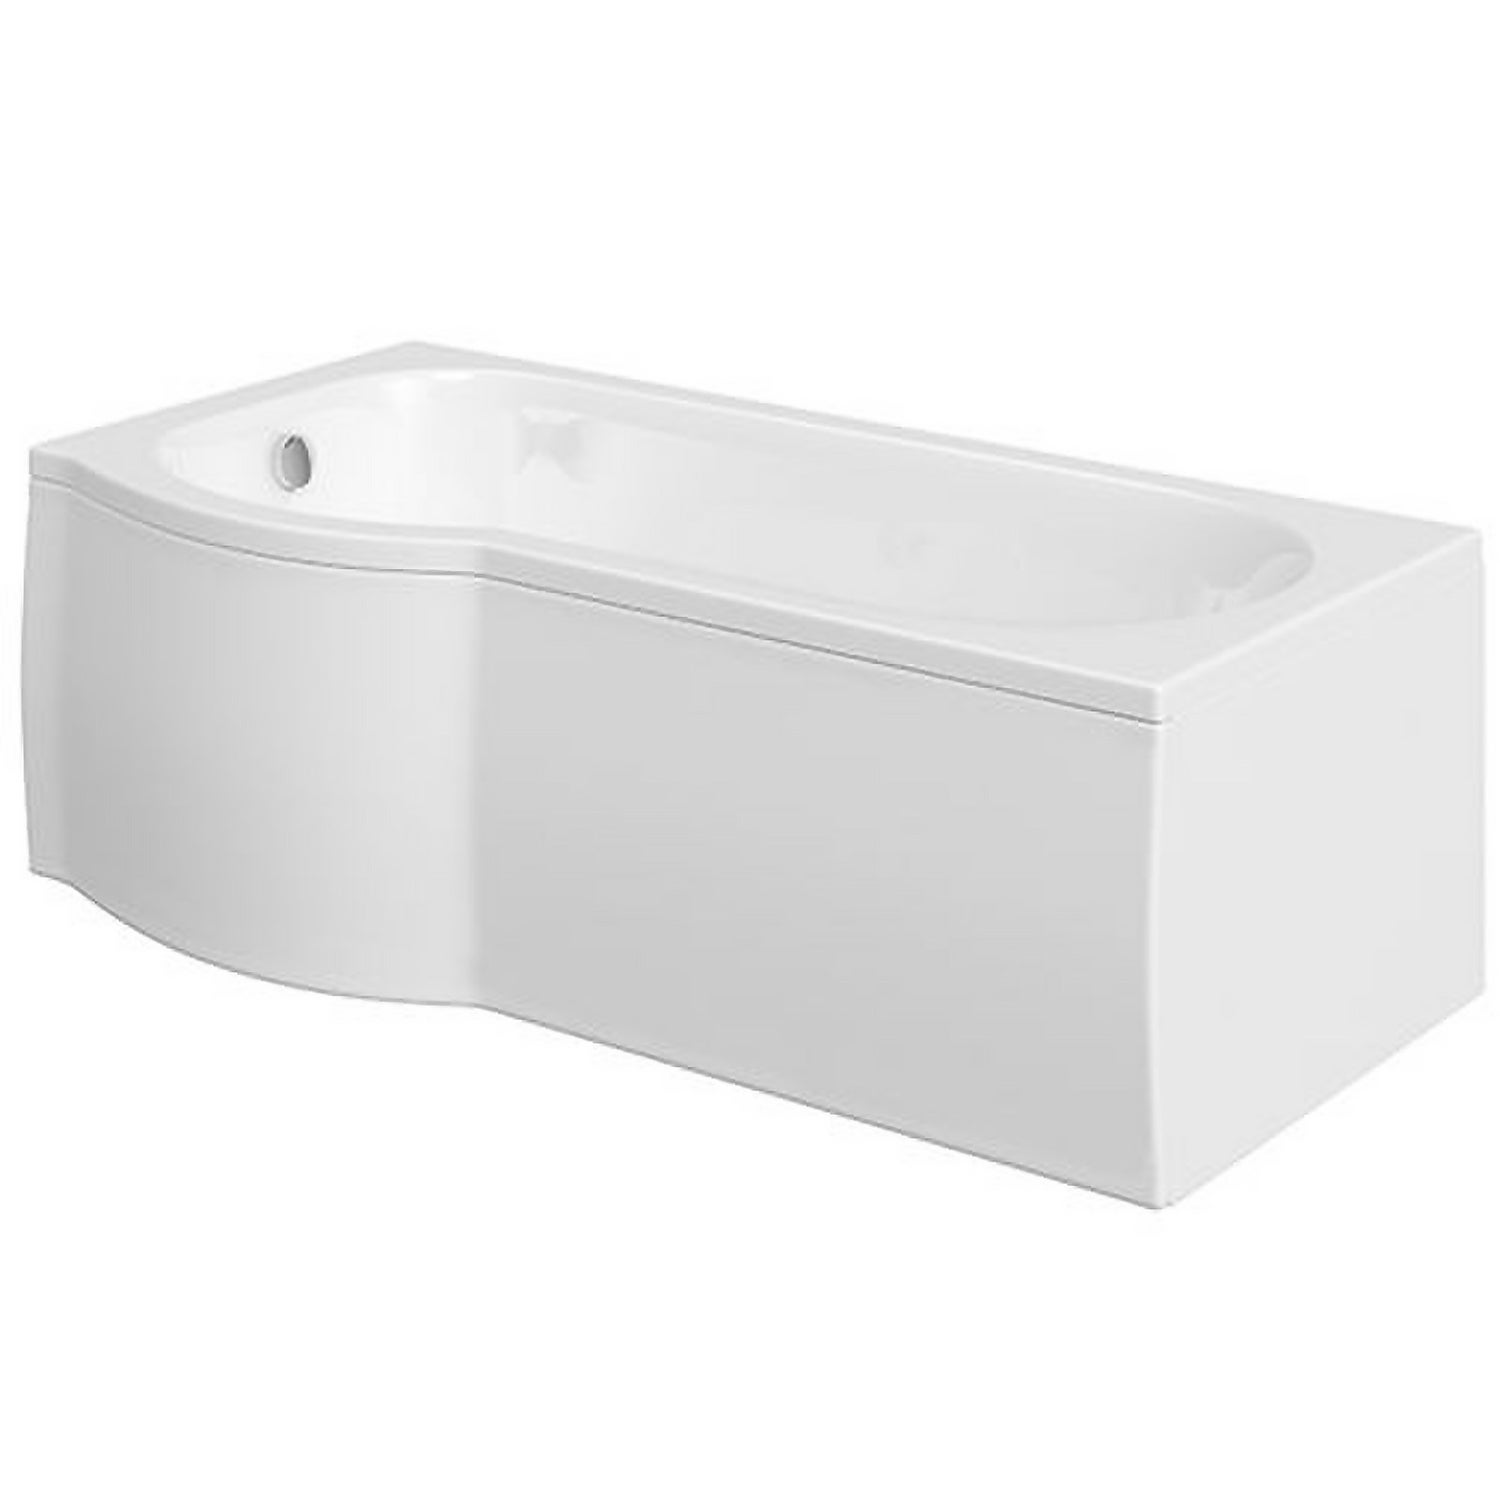 Pilma White Left Hand Shower Bath with Screen - 1700 x 850mm